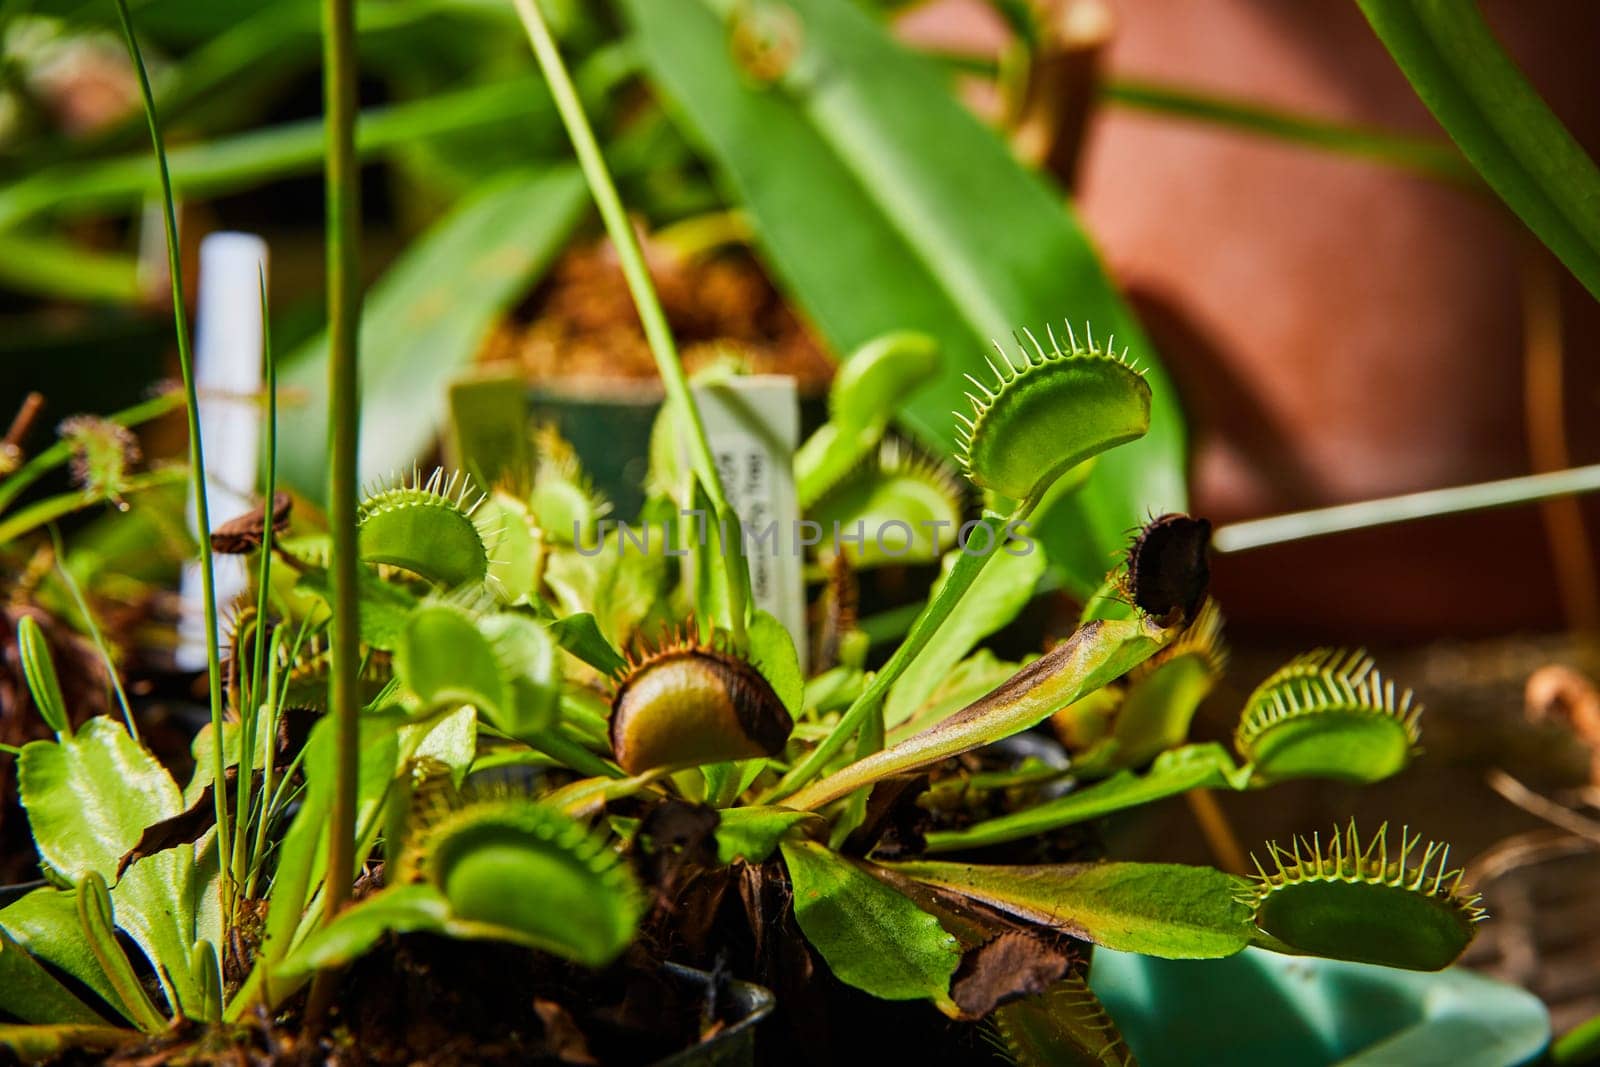 Venus Flytrap Collection in Greenhouse Close-Up by njproductions